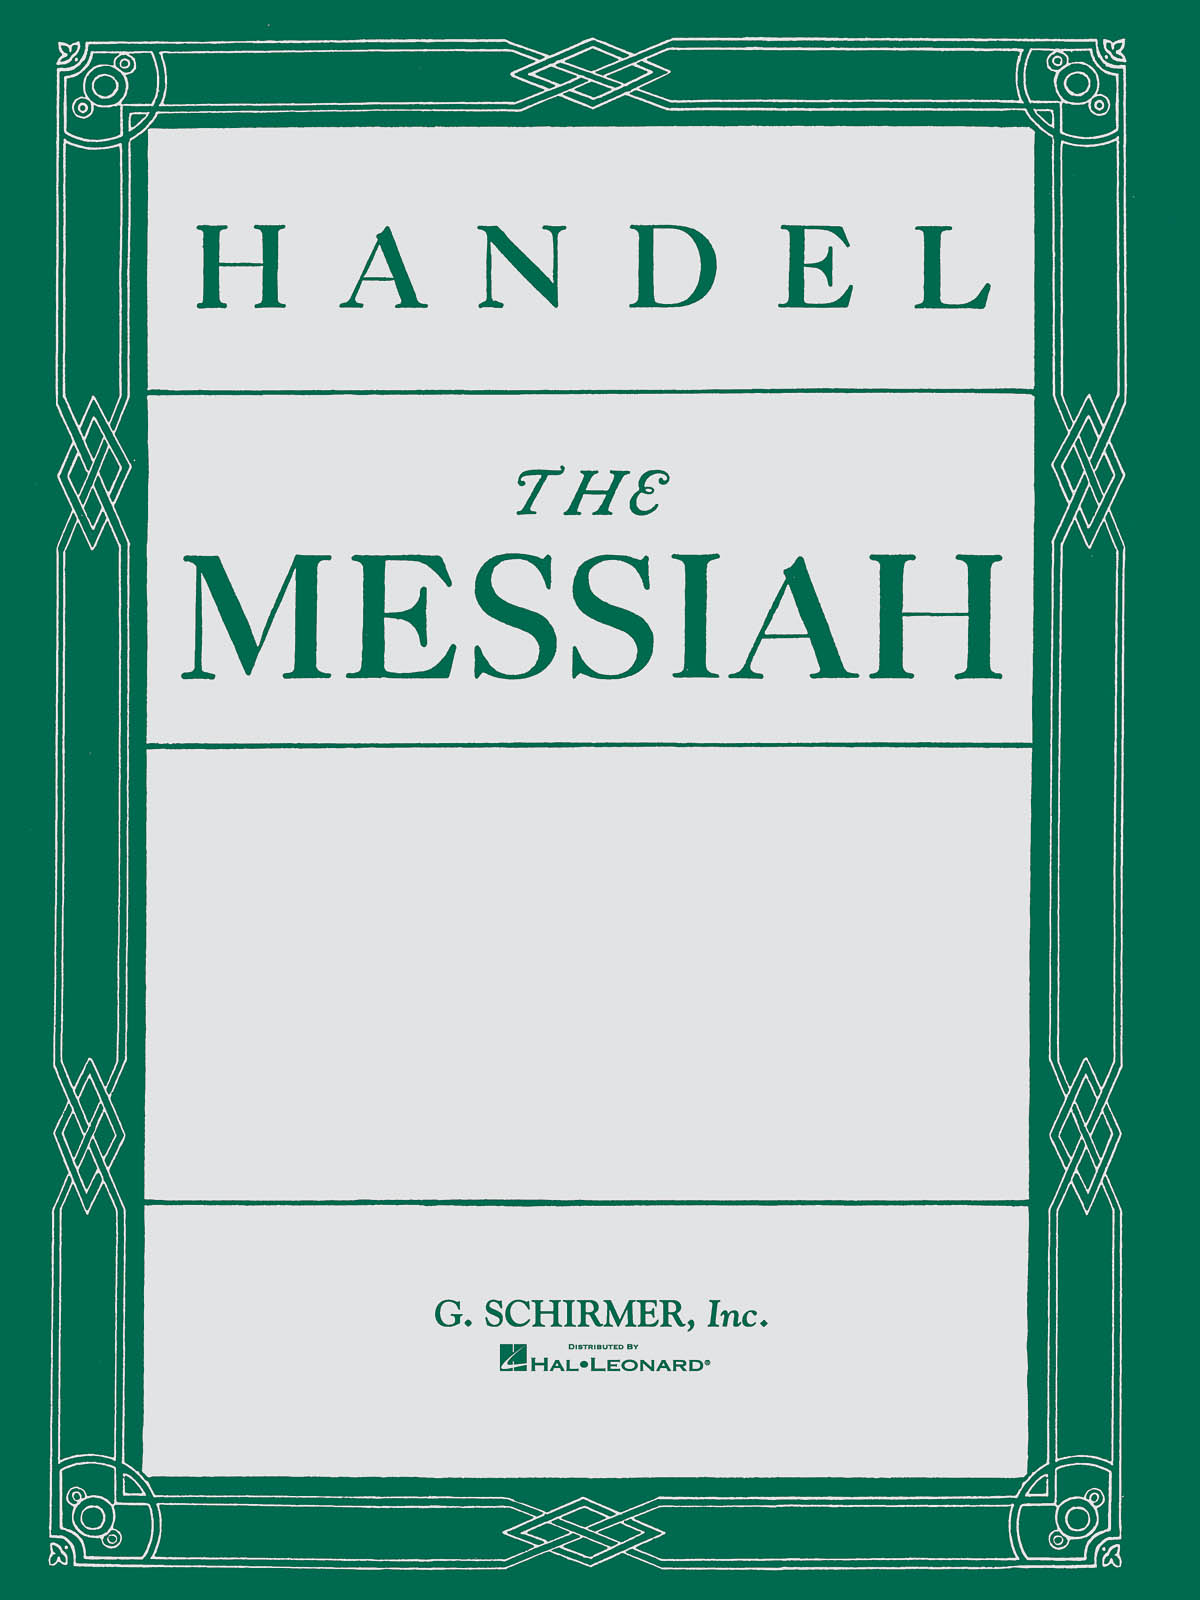 G.F. Handel: Messiah - Full Orchestral Set Of Parts (Prout Edition)